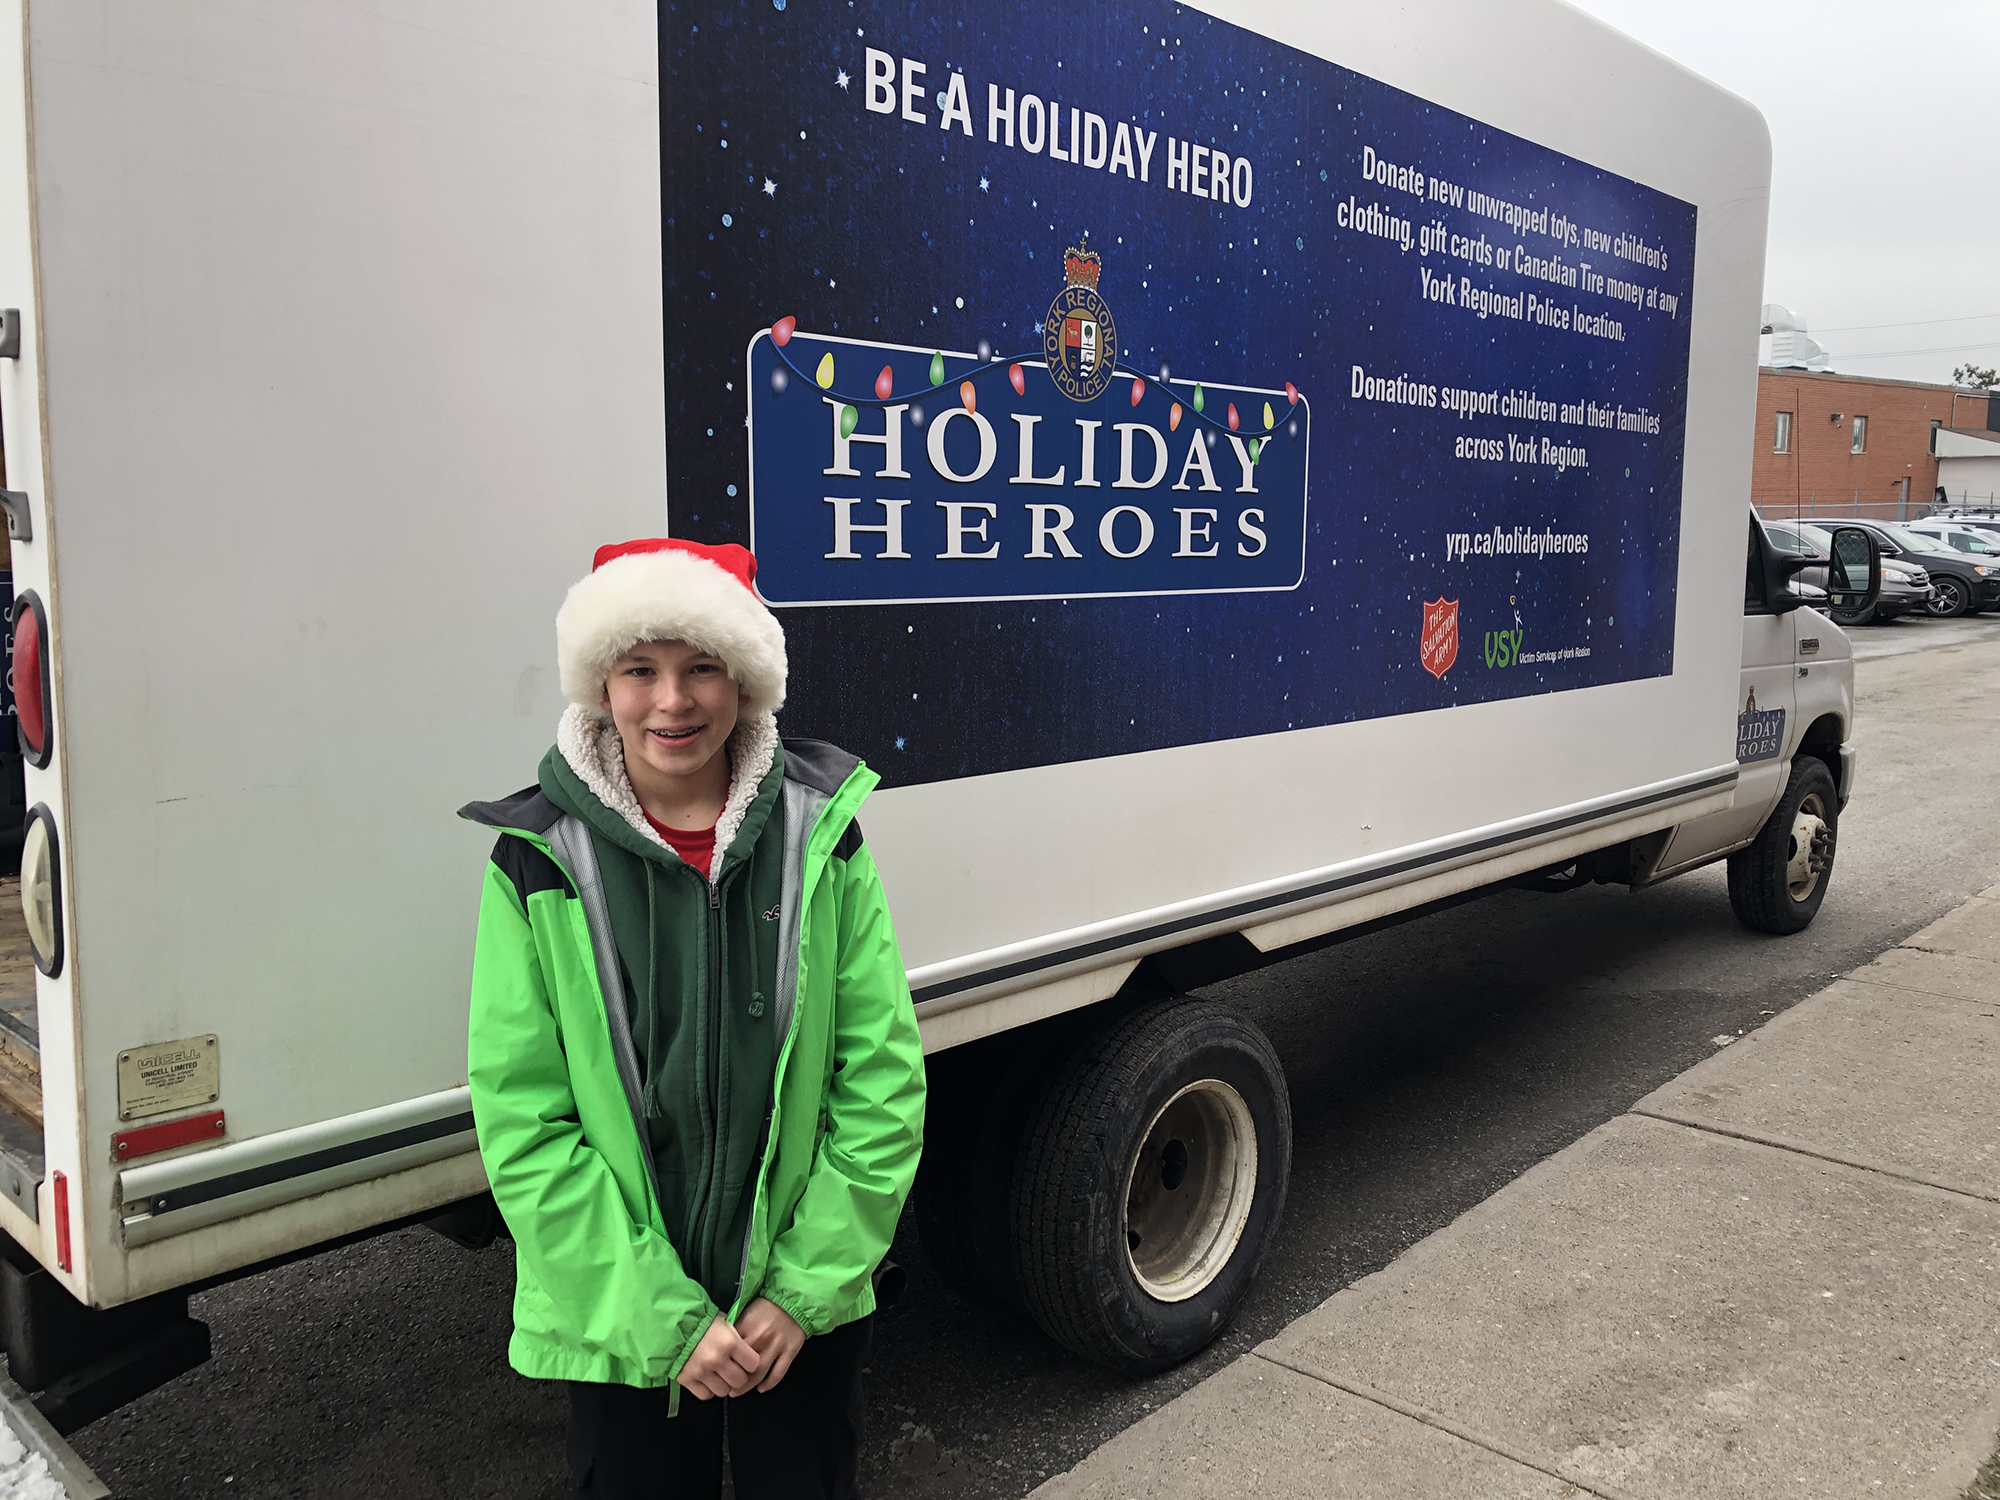 A male student in a Santa hat stands in front of the Holiday Heroes truck